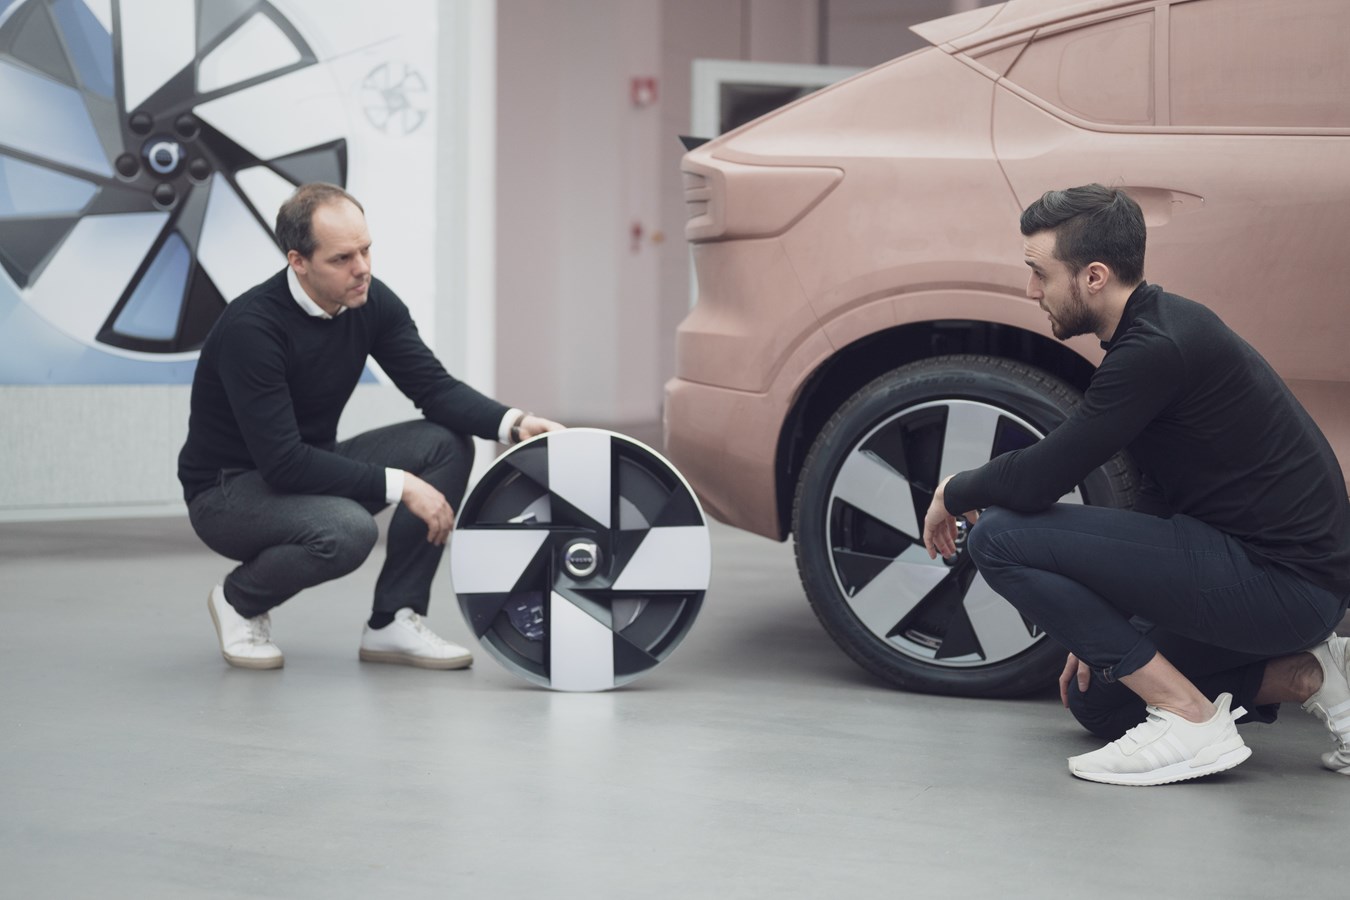 Maxime Célérier (left) compares the wheel from the Volvo 360c concept car to the C40 wheel design, together with Maxime Prevoteaux.